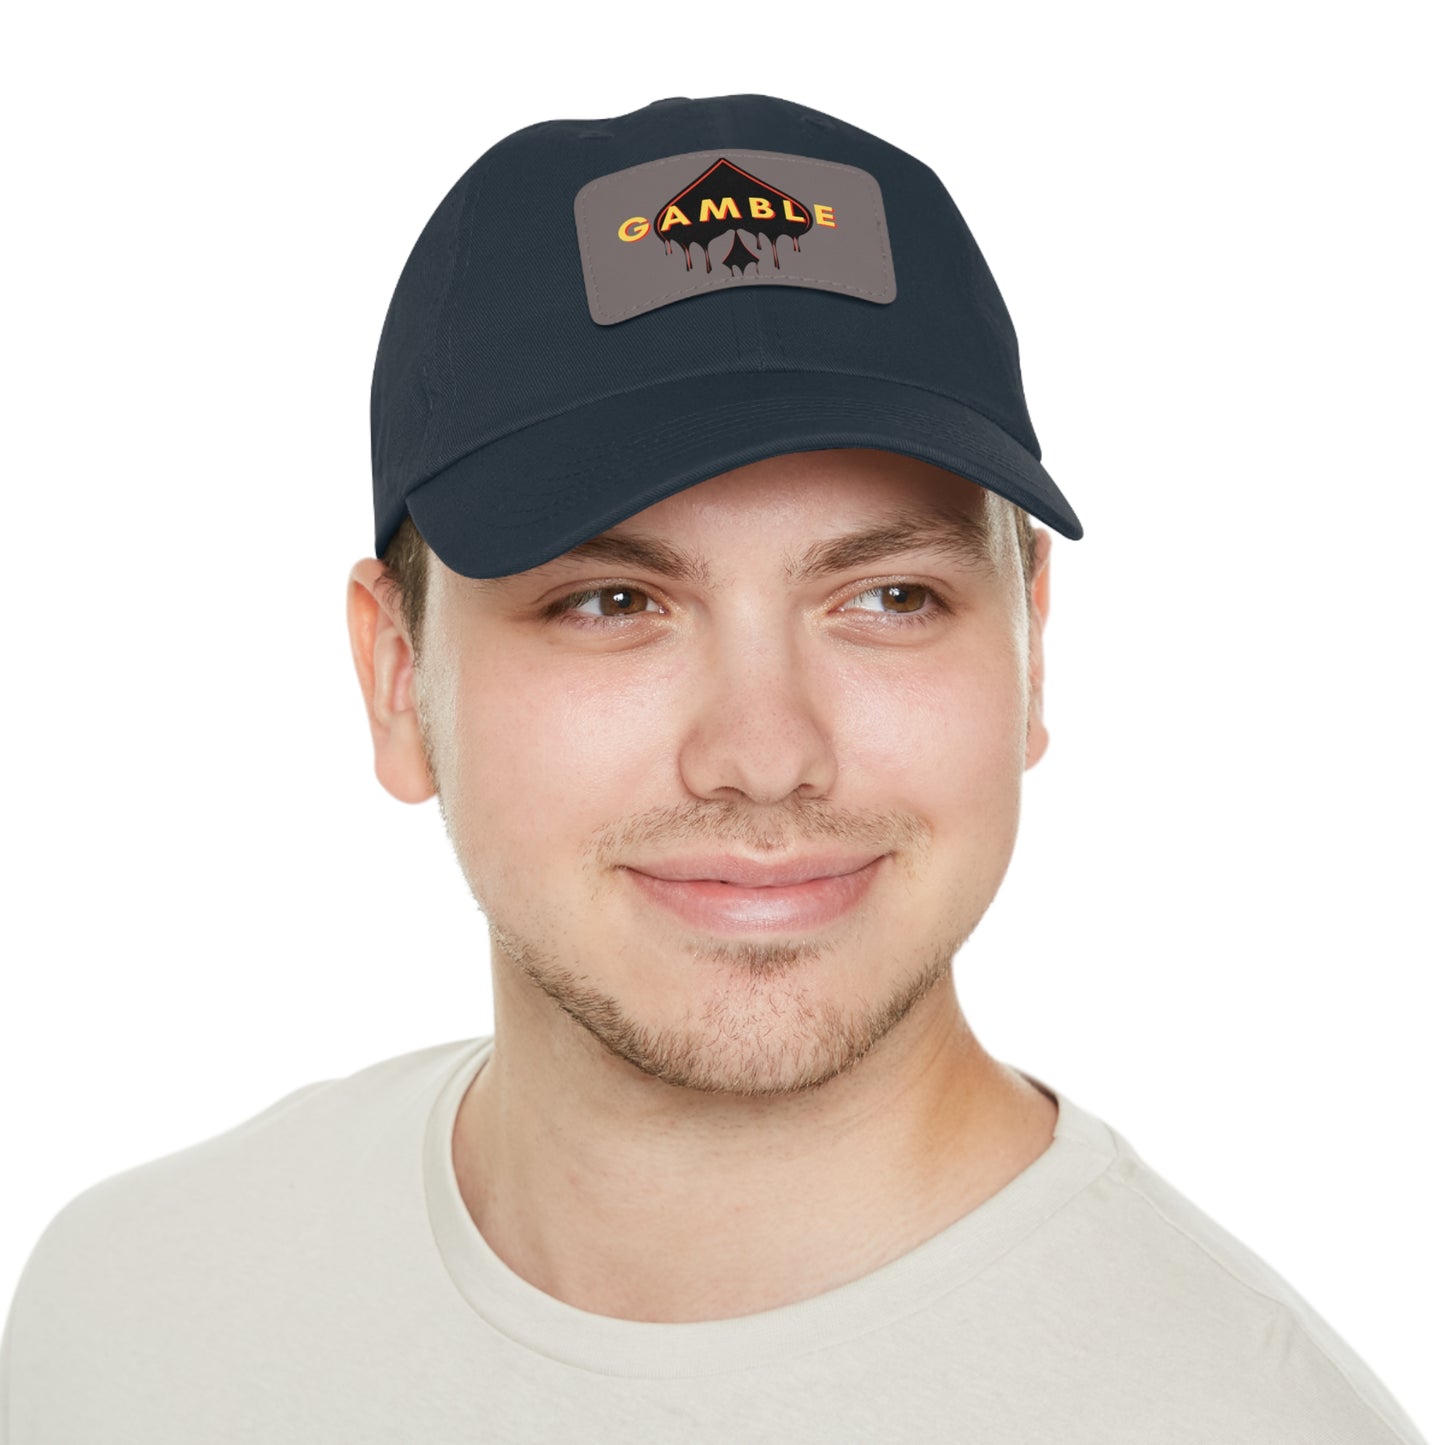 Elite Poker Pro Dad Cap with Leather Patch